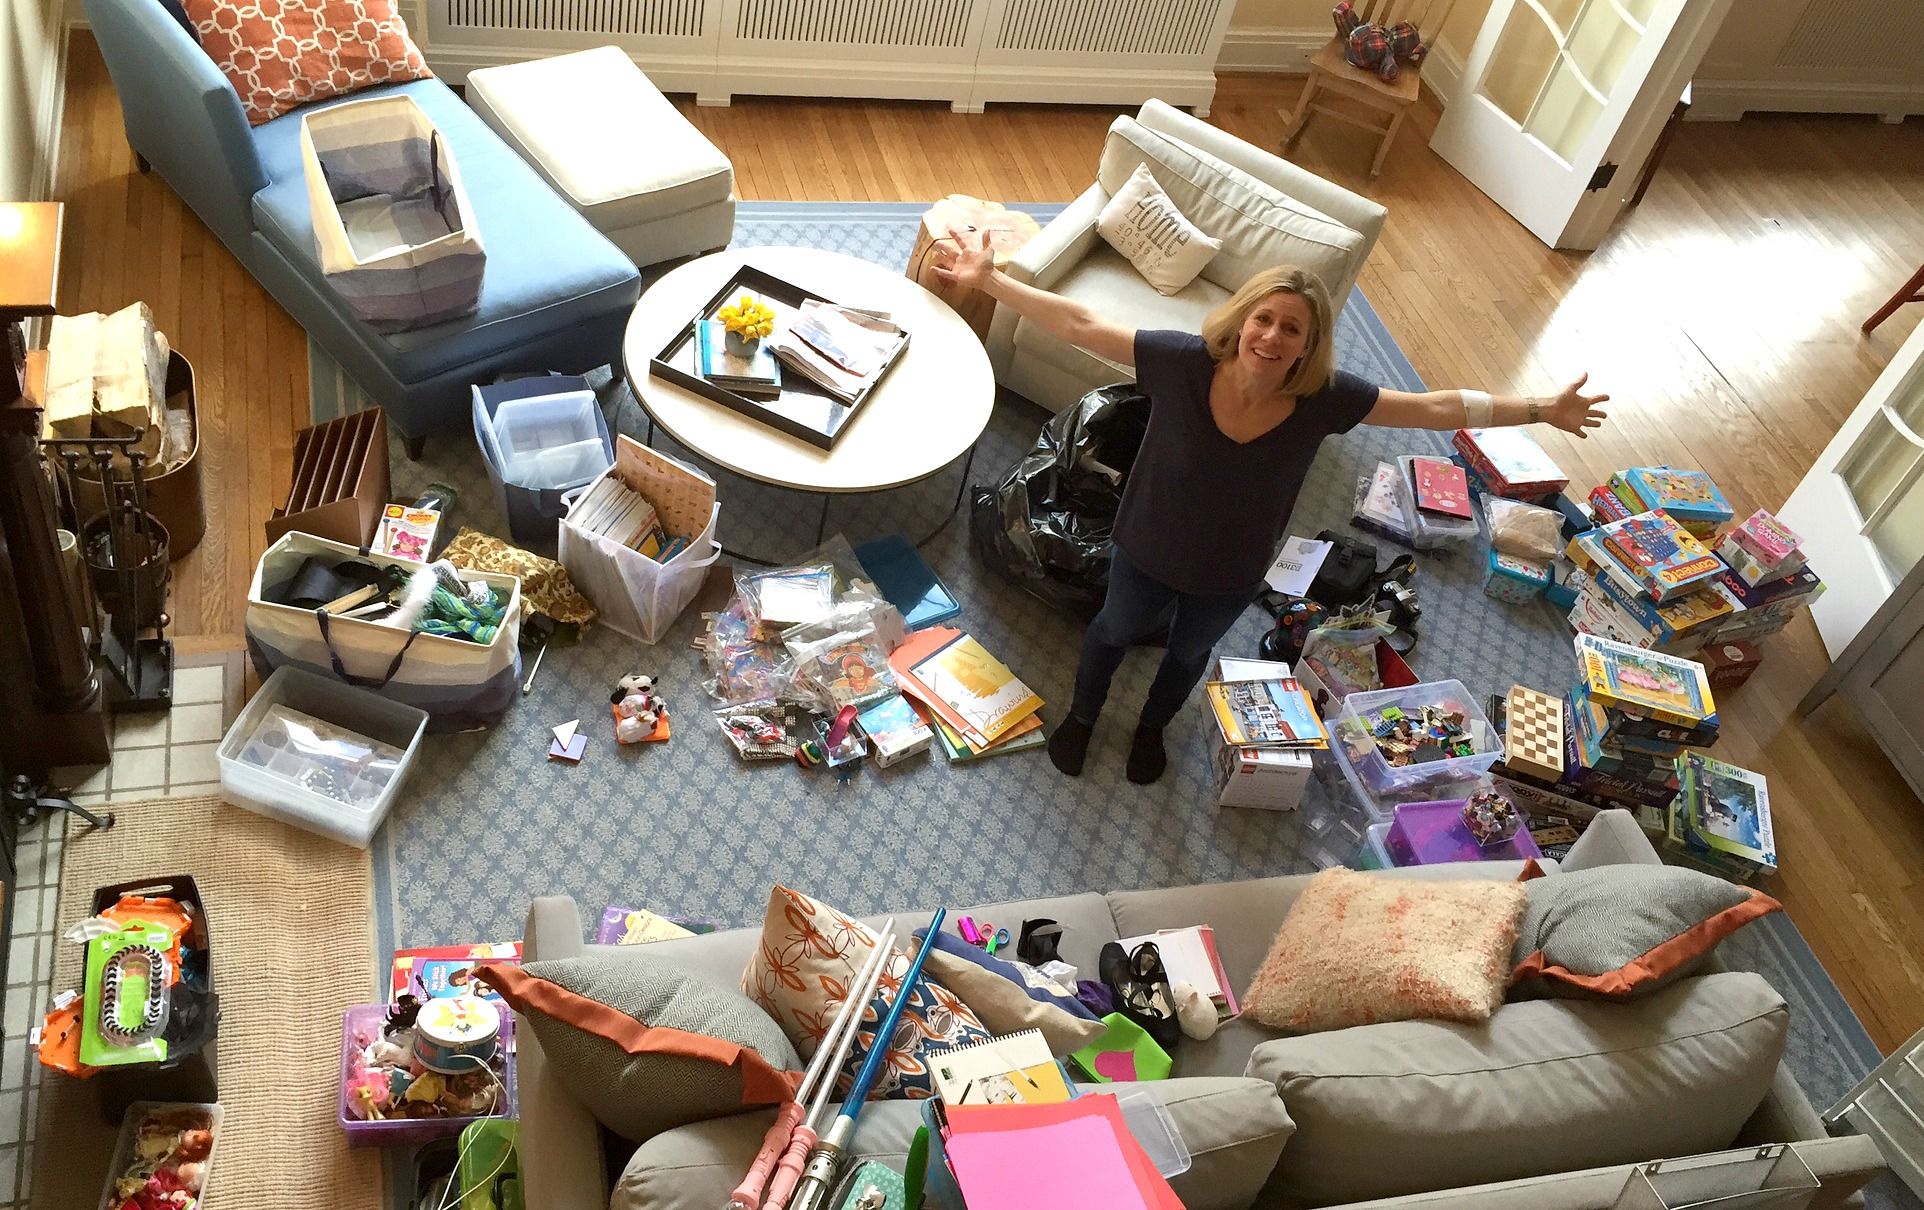 https://hips.hearstapps.com/goodhousekeeping/assets/16/01/1452283701-cleaning-out-everything.jpg